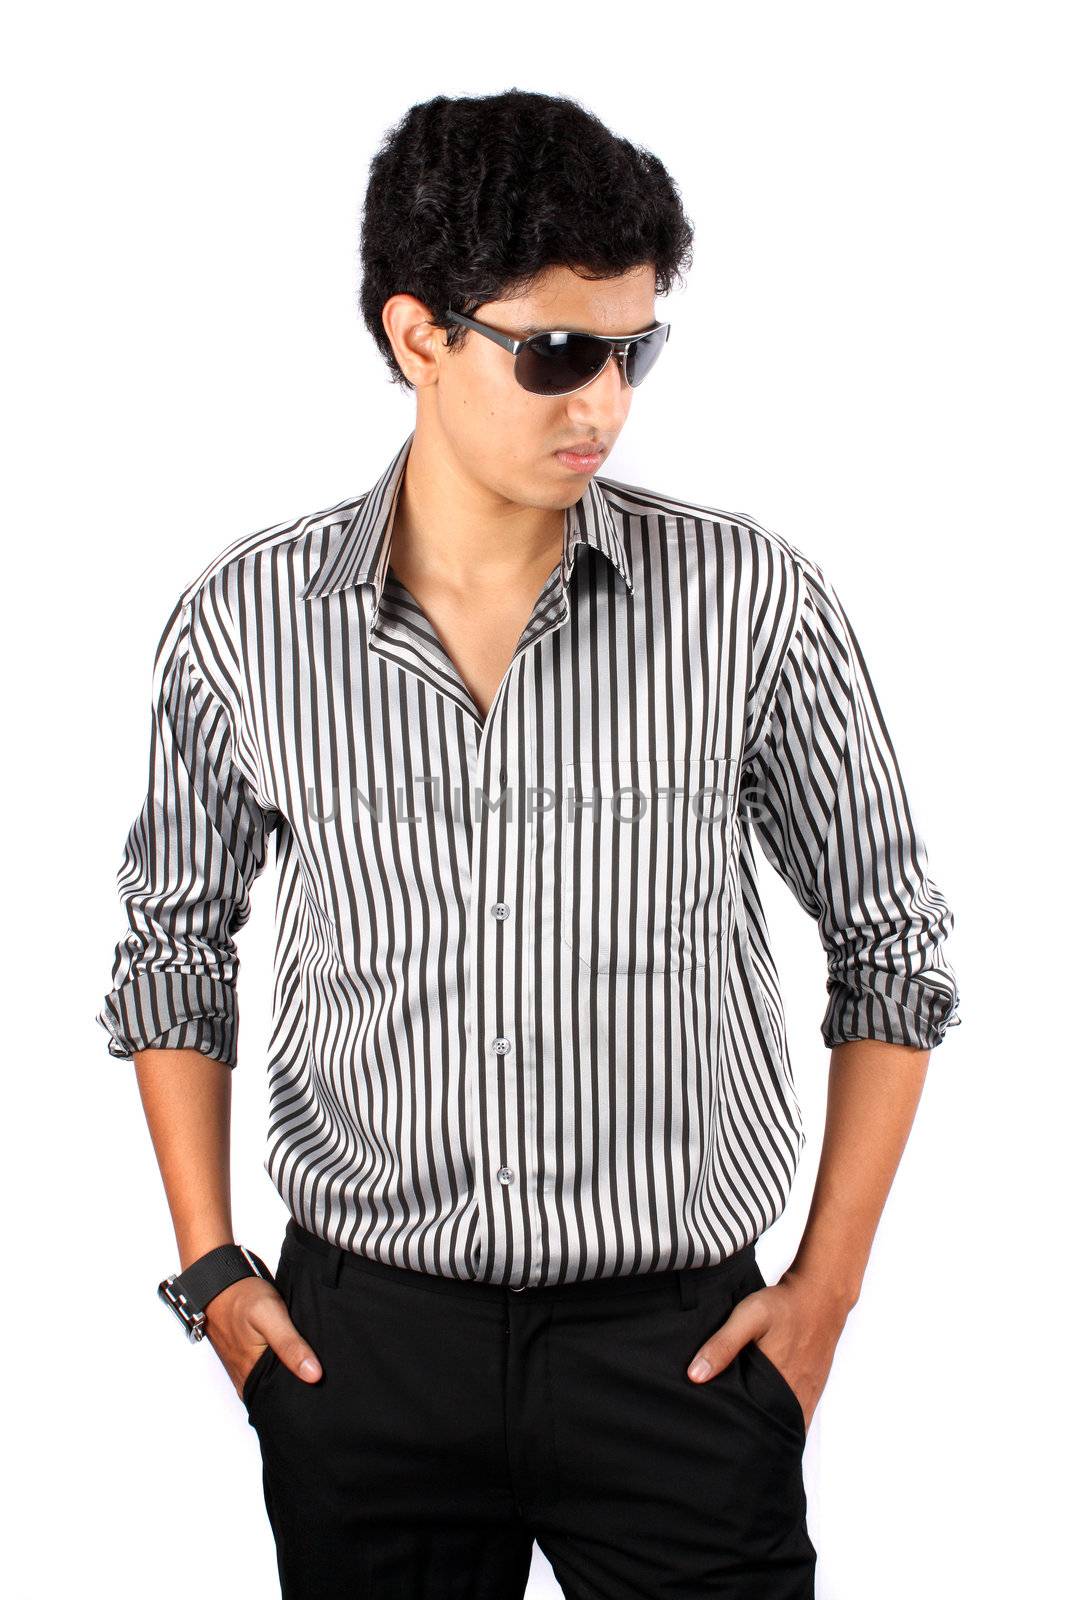 A portrait of a smart Indian guy wearing sunglasses, on white studio background.